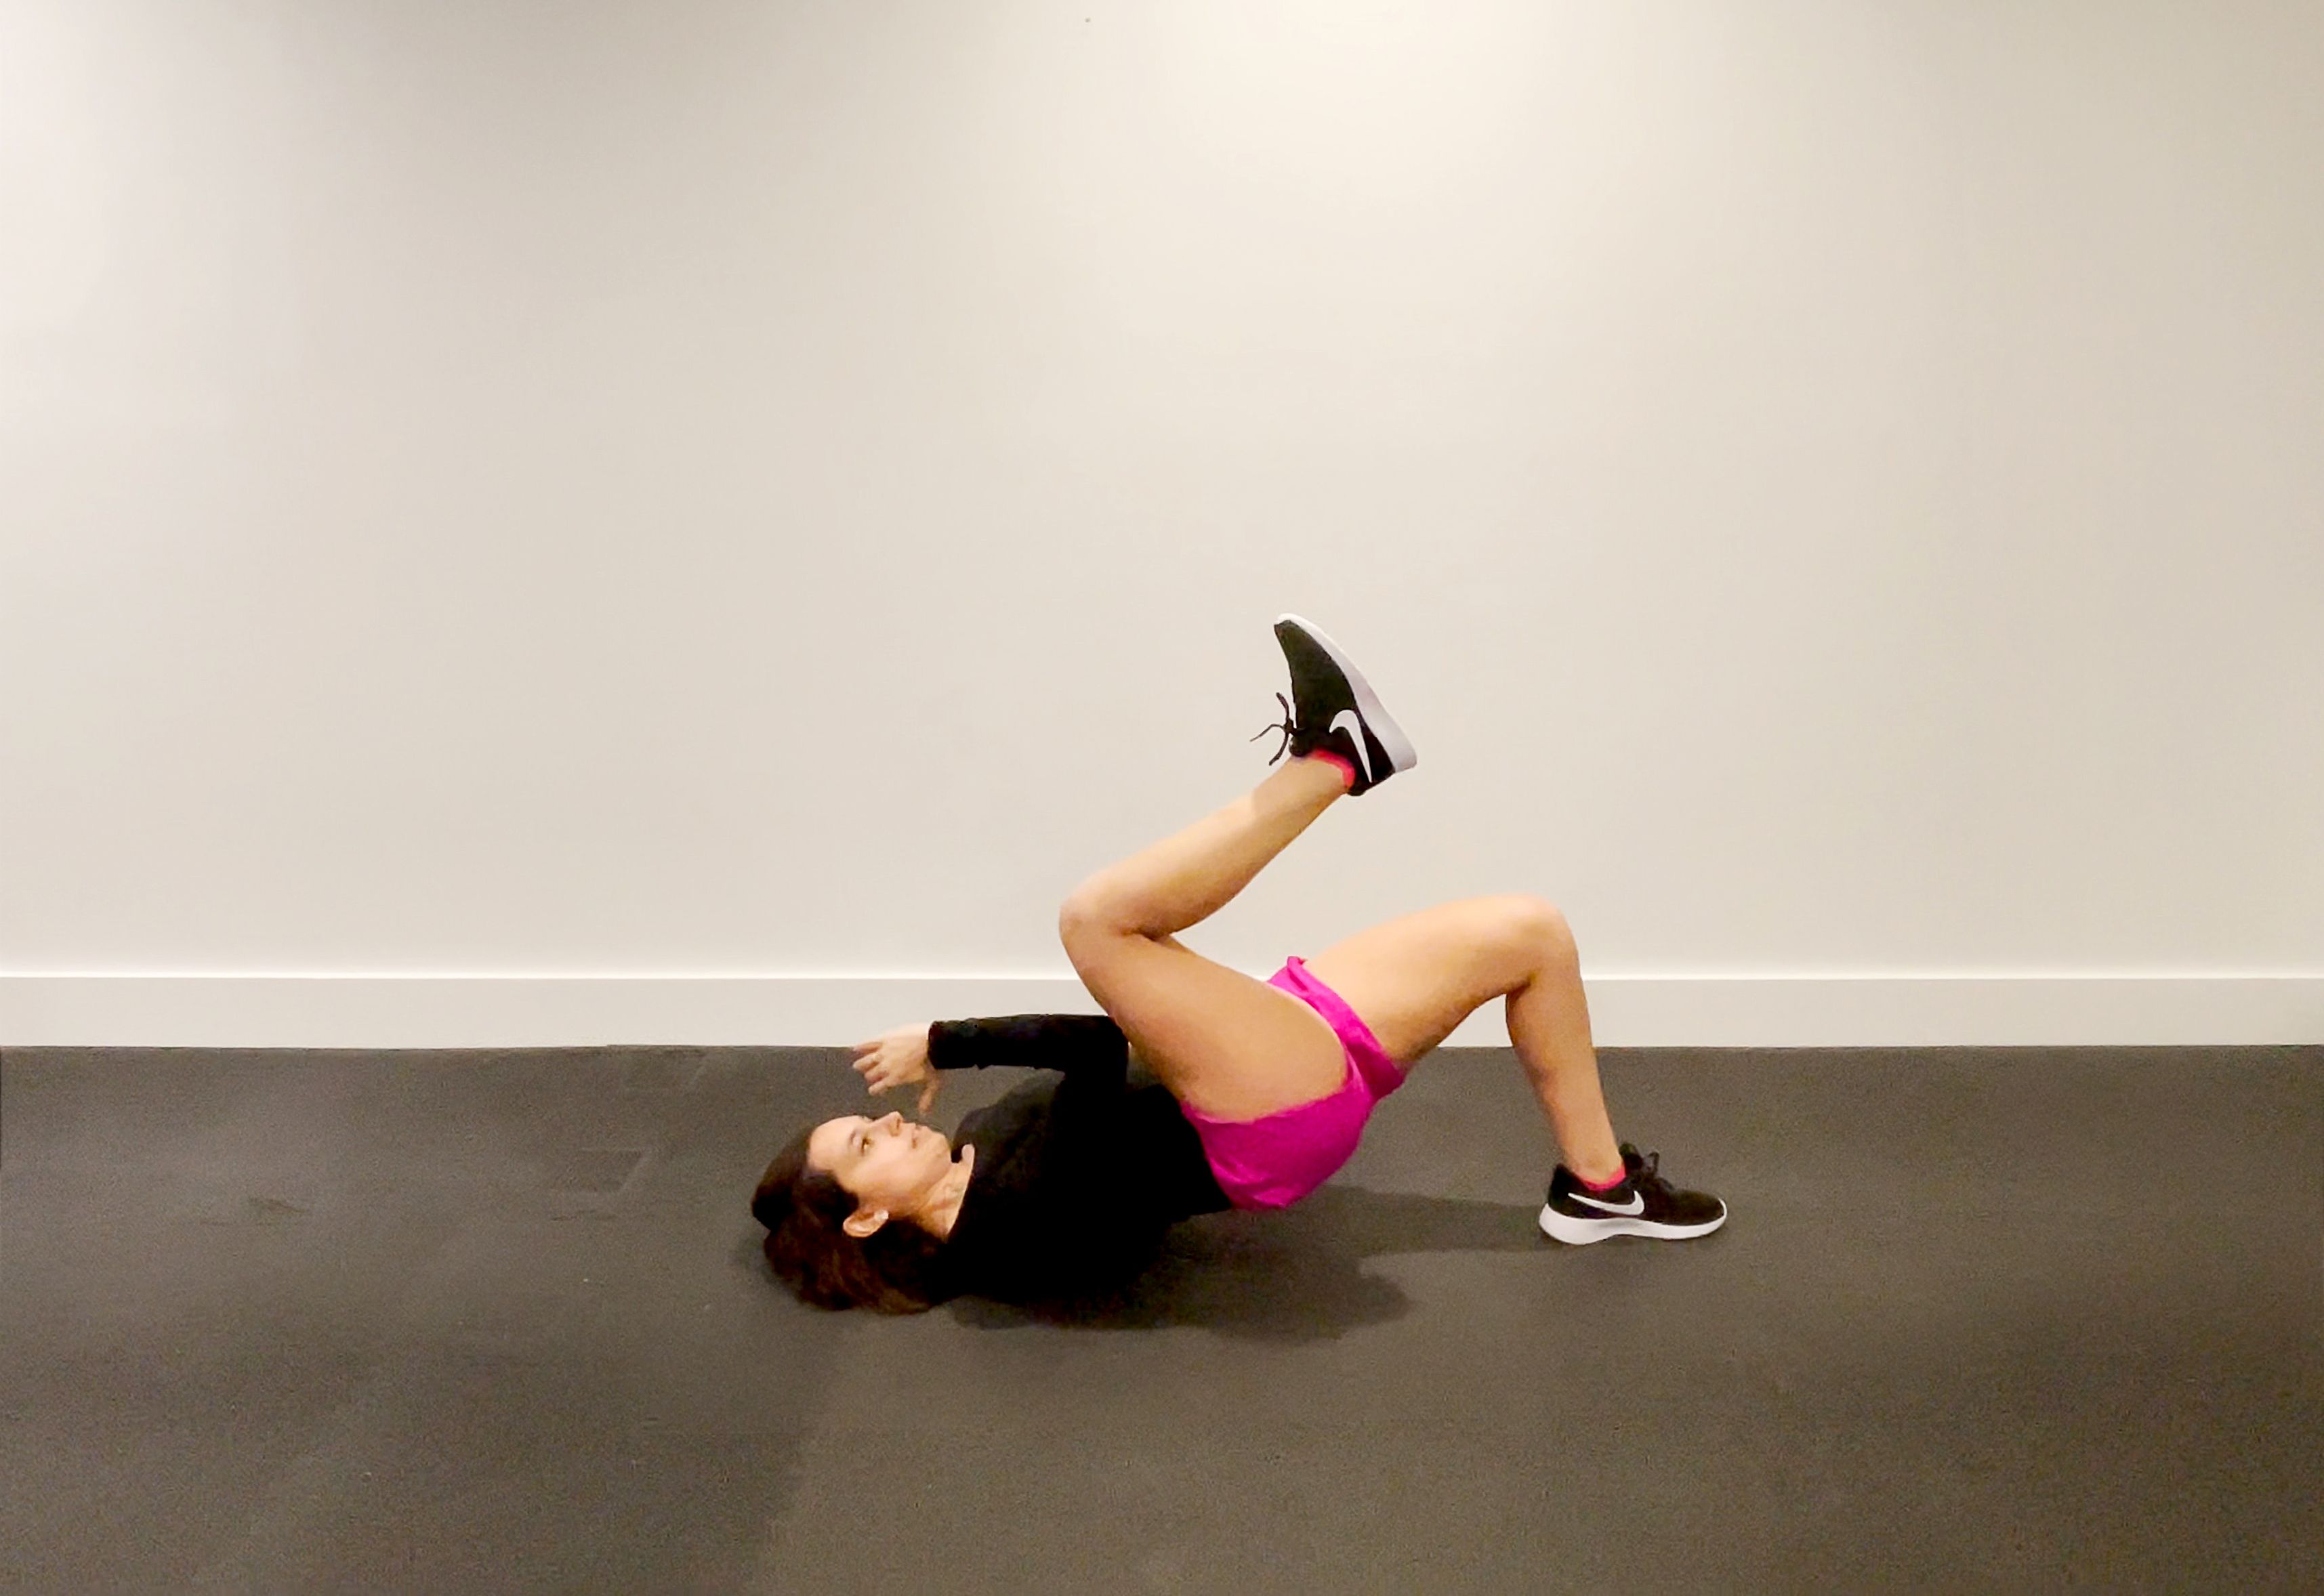 8 Foot Exercises For Strong, Pain-Free Ankles And Feet